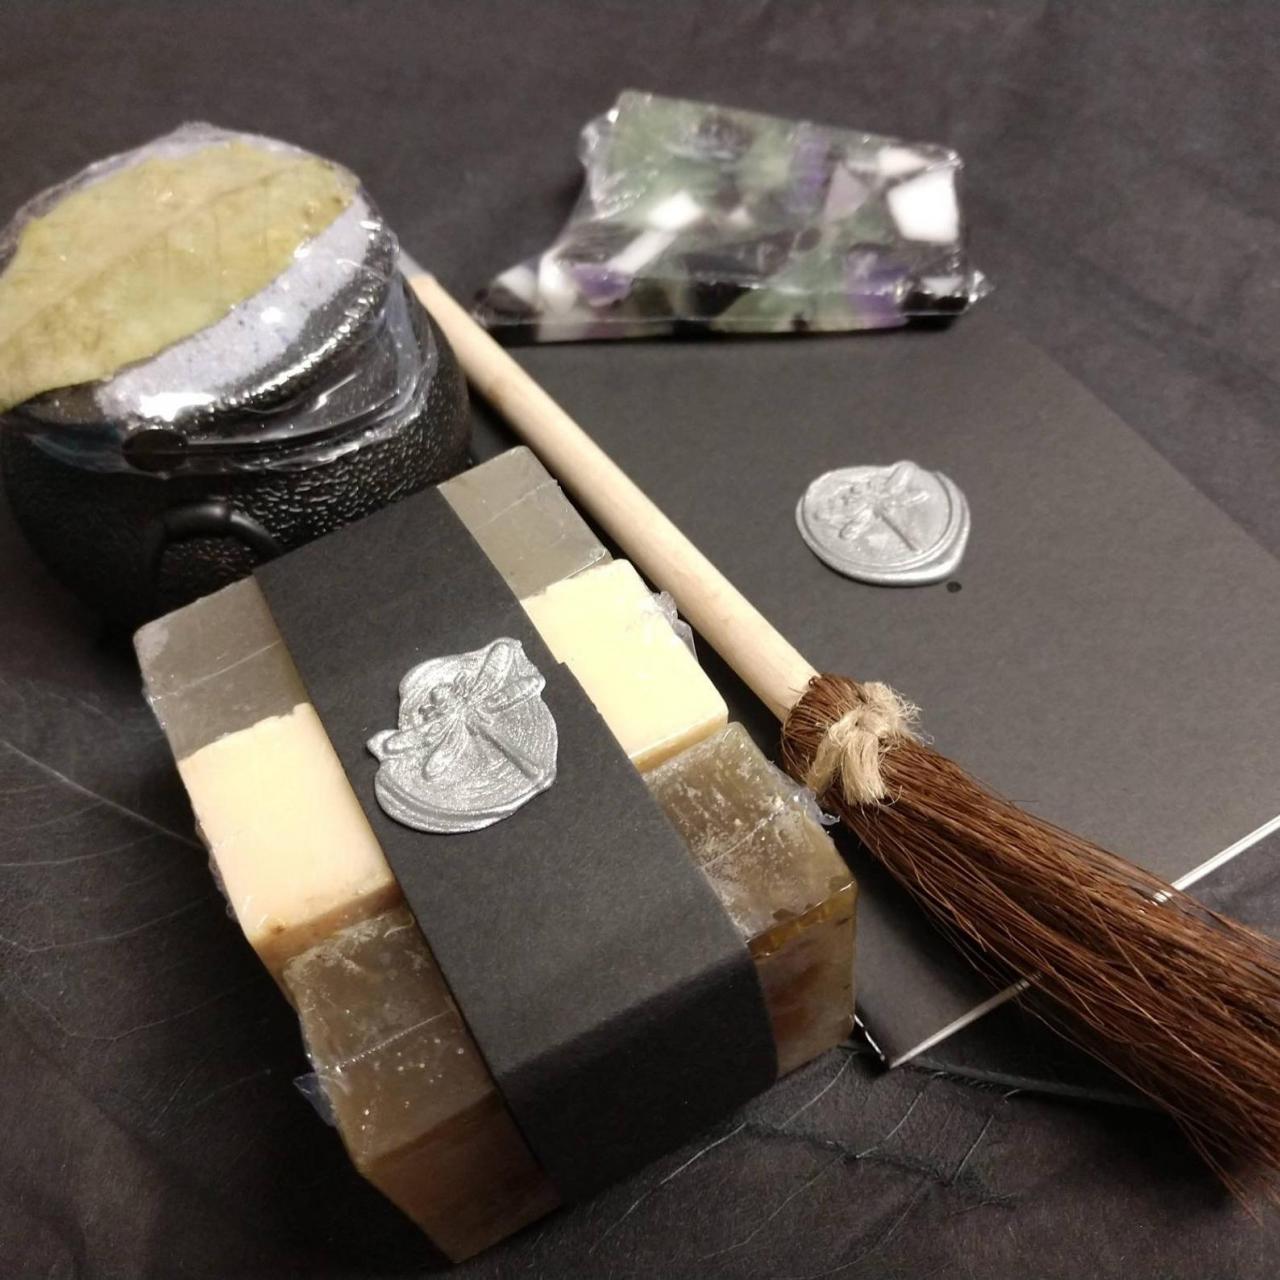 WITCHES BREW gift set with all natural herb infused soaps cauldron bath bomb with gemstone and seashells book and broom pen